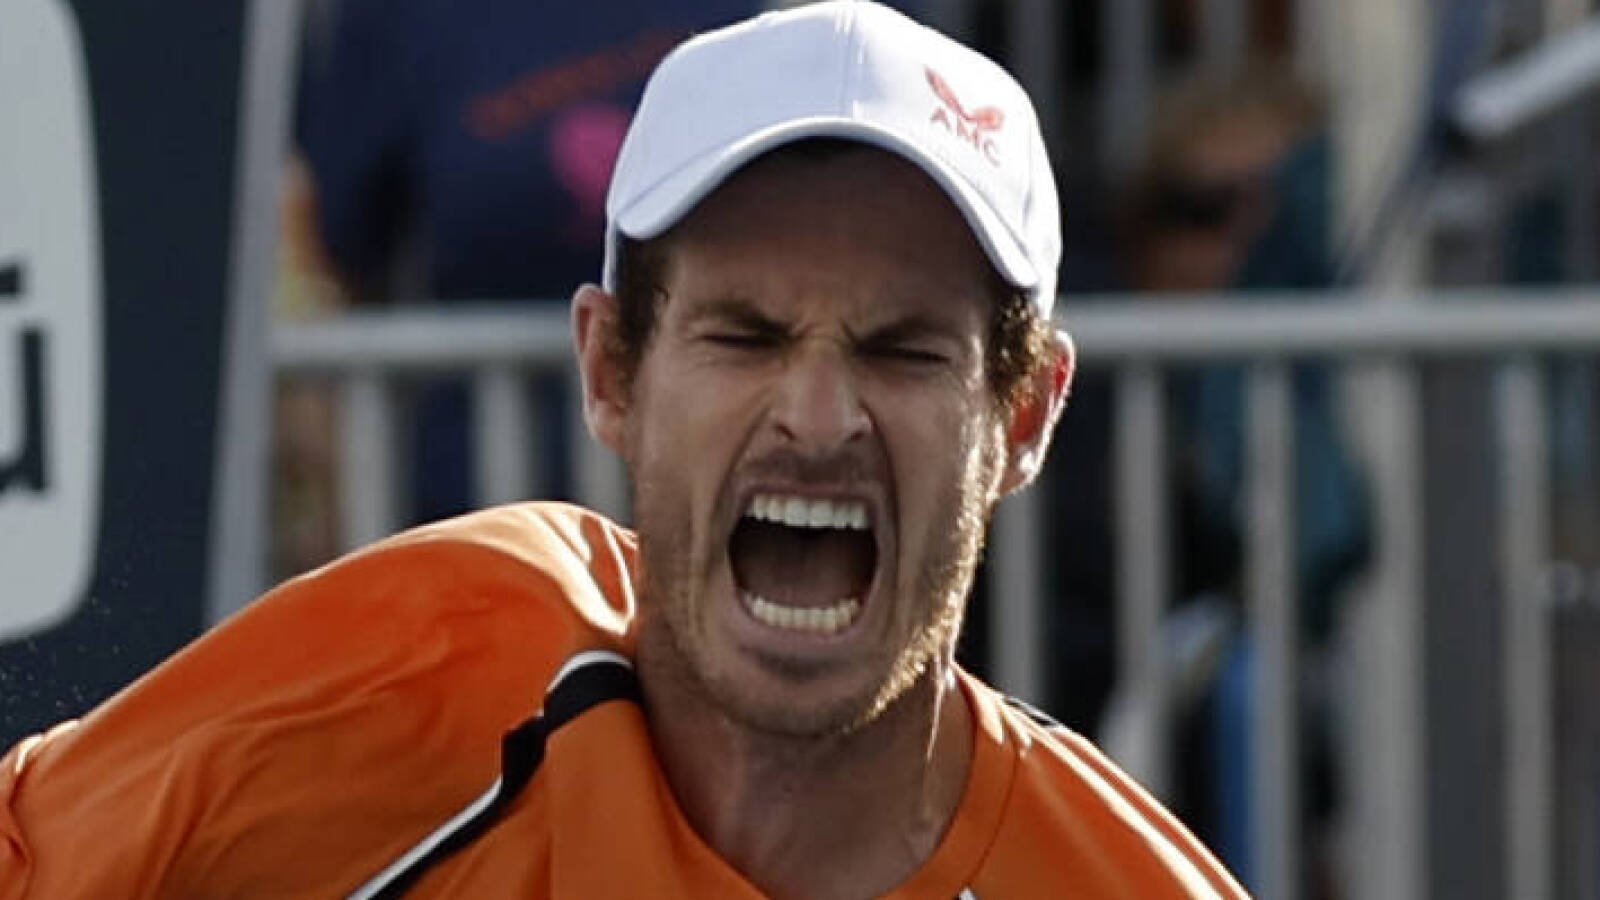 'People have misunderstood him over the years,' Mats Wilander lauds the warrior spirit in Andy Murray who would have won 10 Grand Slams if not for the Big 3